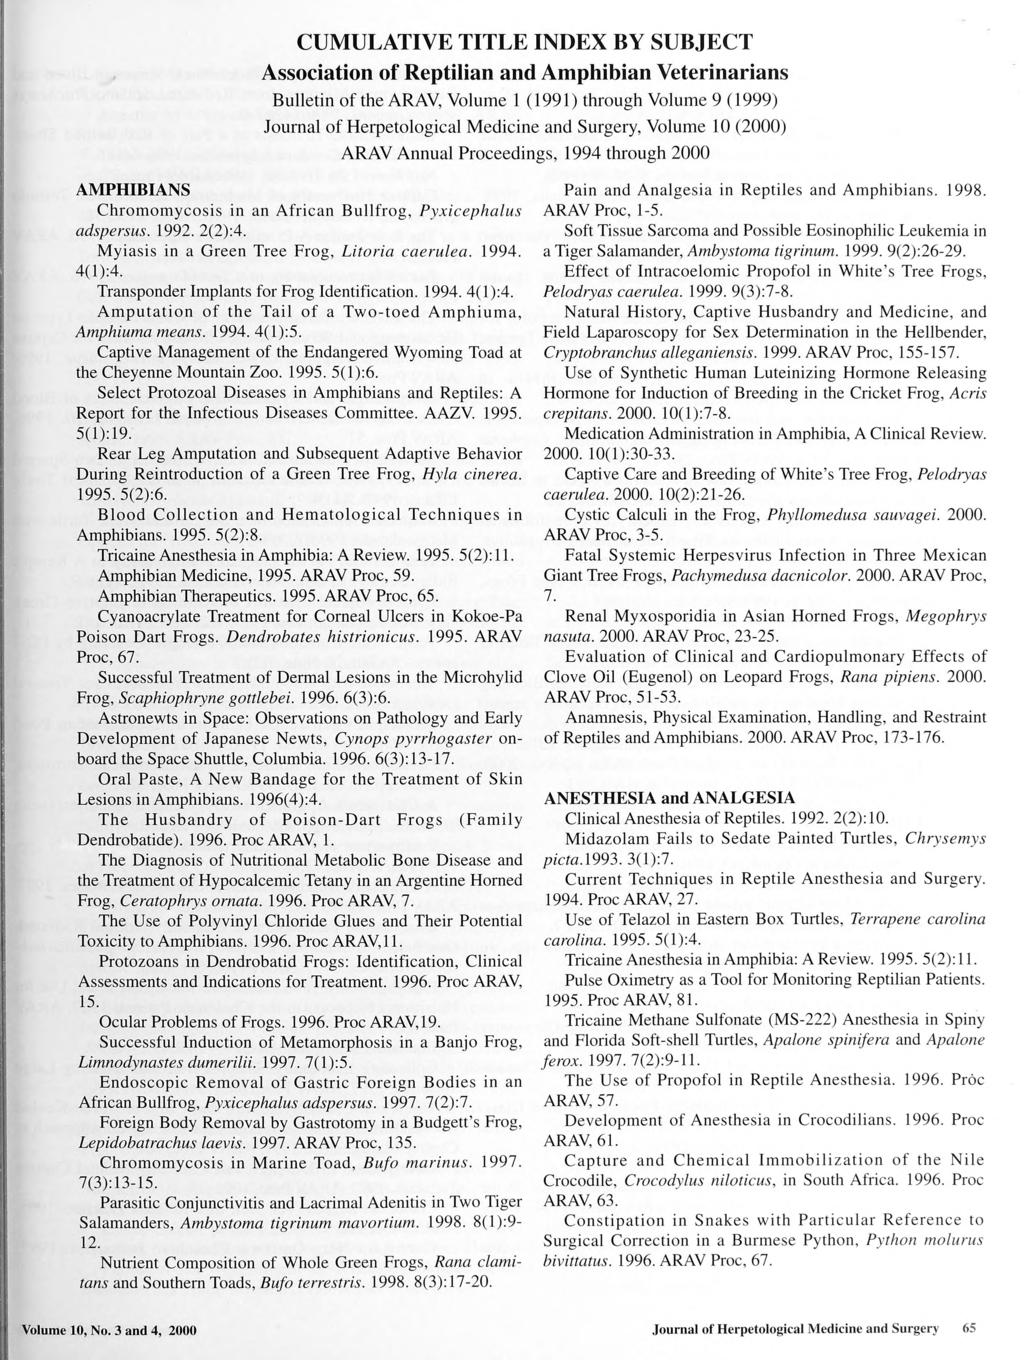 CUMULATIVE TITLE INDEX BY SUBJECT Association of Reptilian and Amphibian Veterinarians Bulletin of the ARAV, Volume 1 (1991) through Volume 9 (1999) Journal of Herpetological Medicine and Surgery,